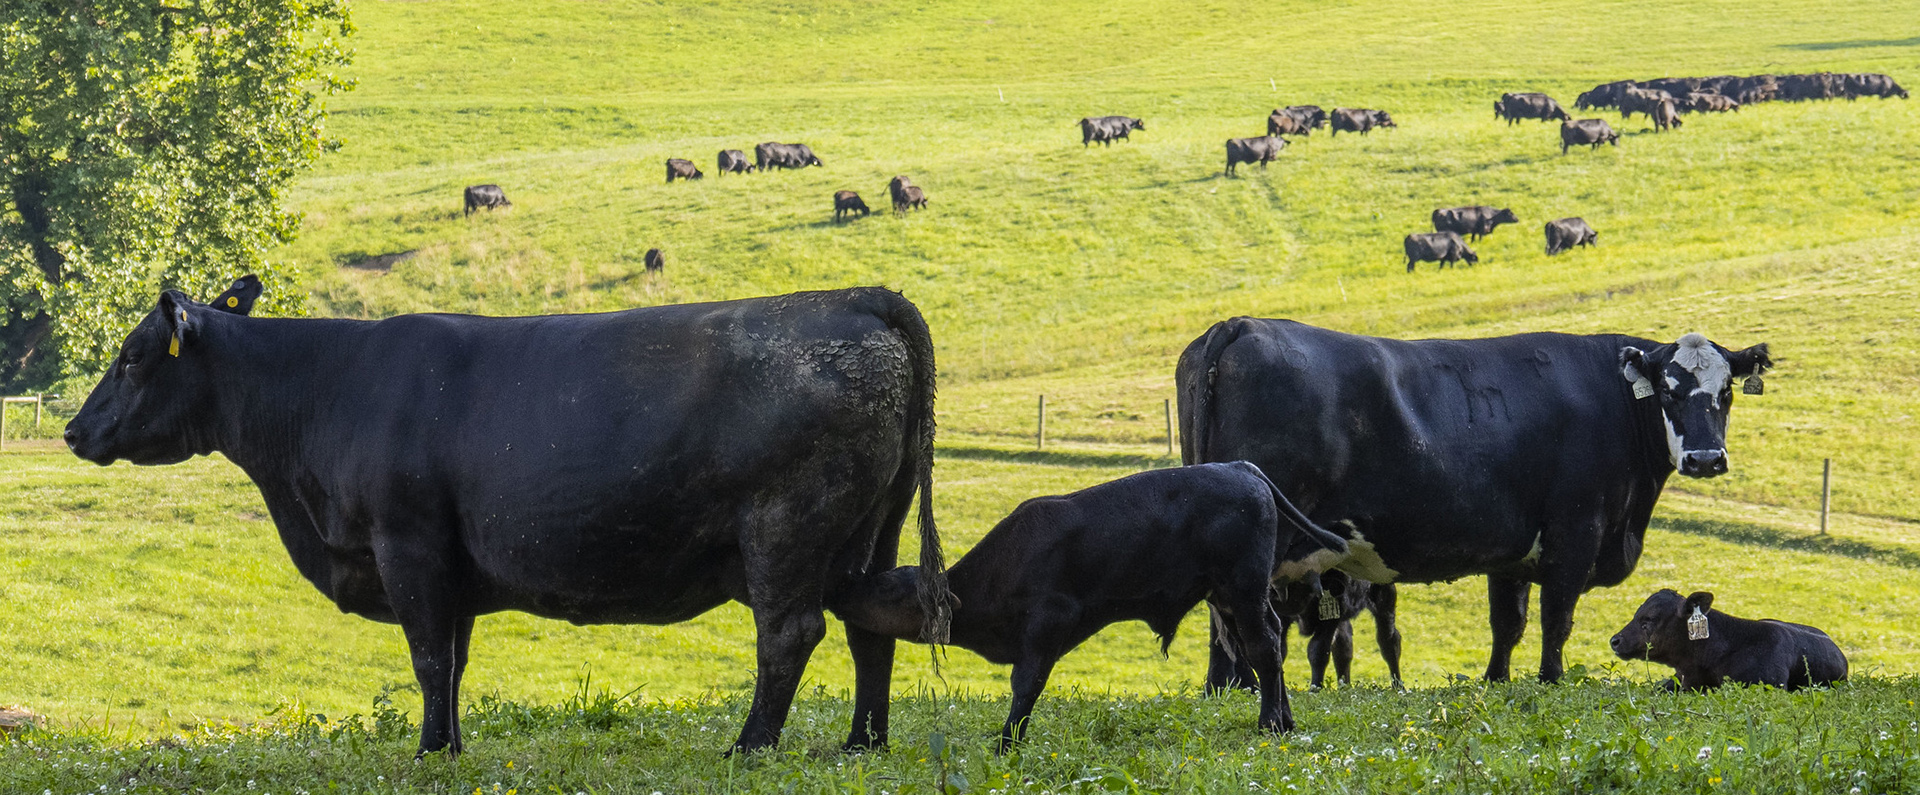 Four black cows in a field. 